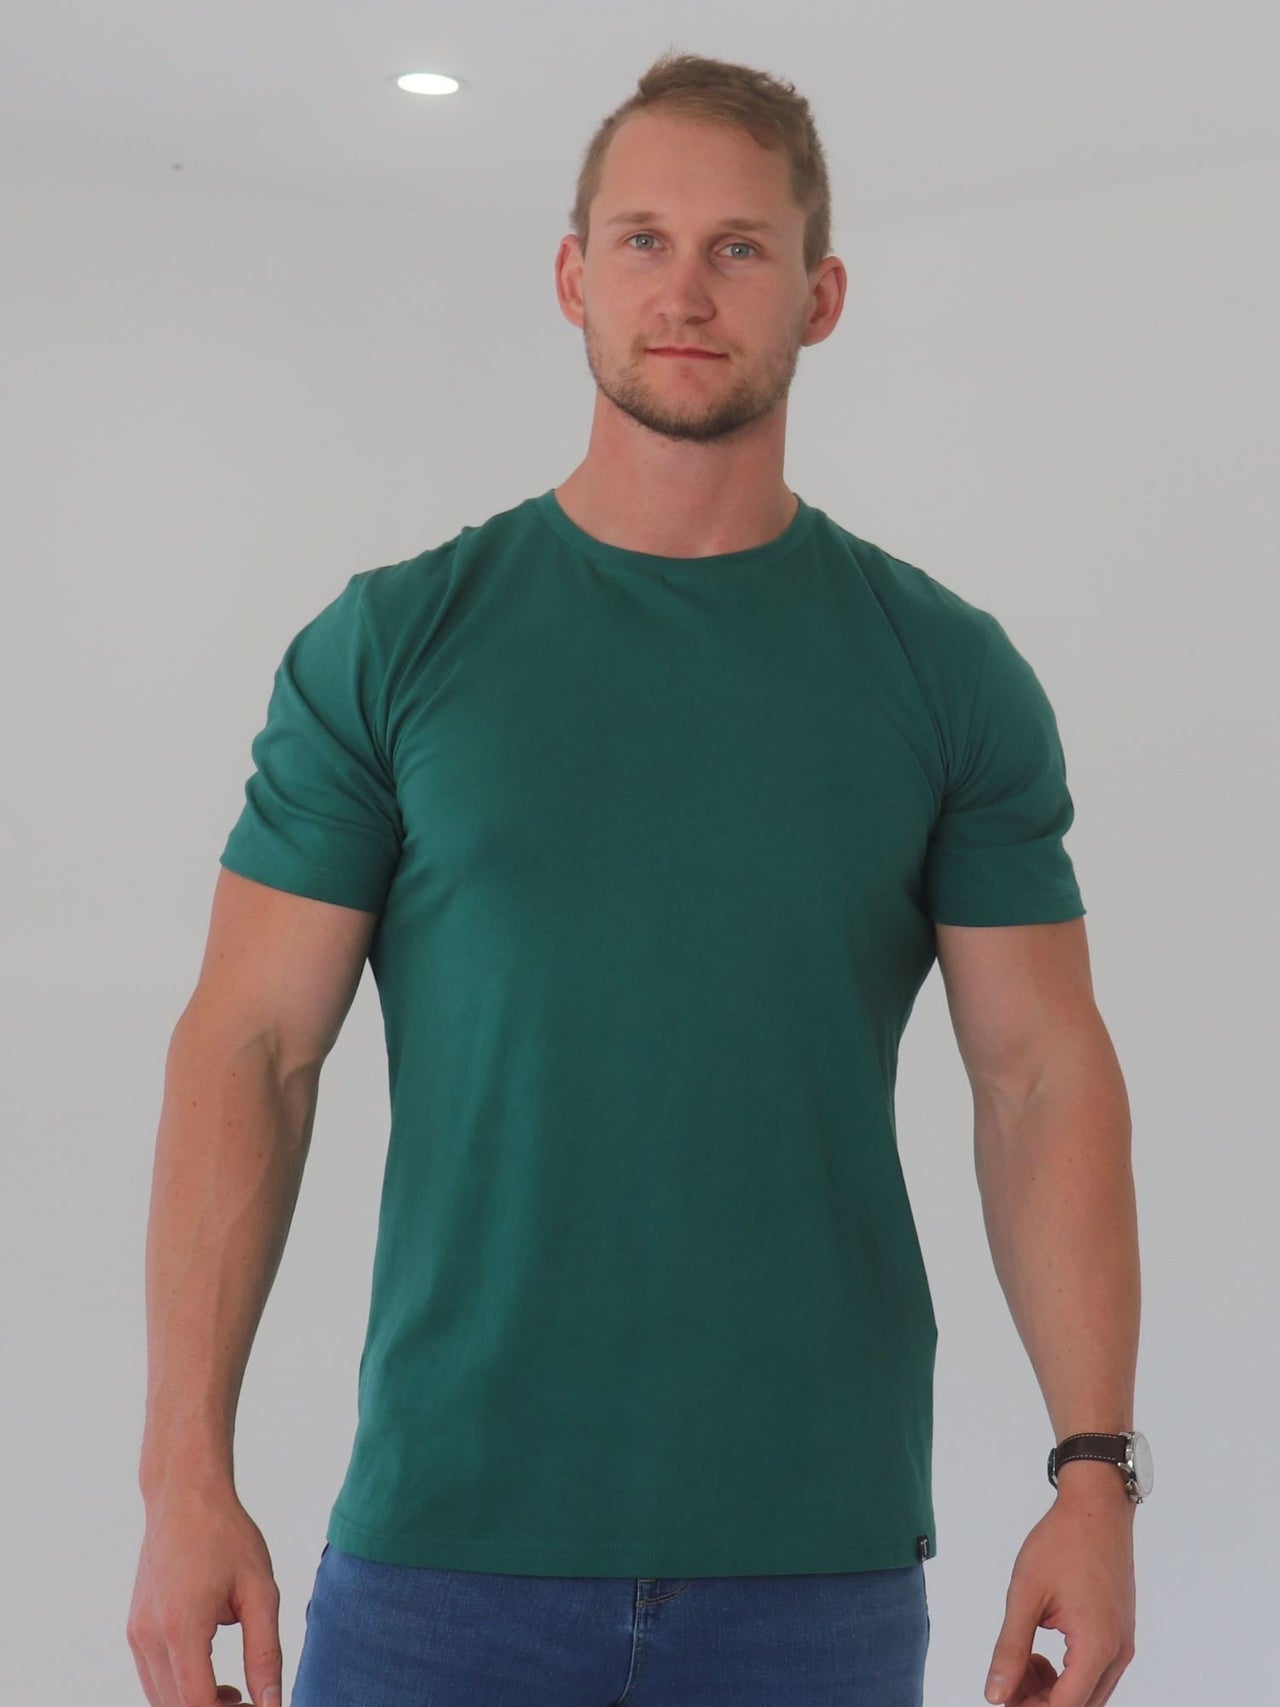 A tall and broad guy smiling in the studio and wearing a dark green 2XL tall slim t-shirt.